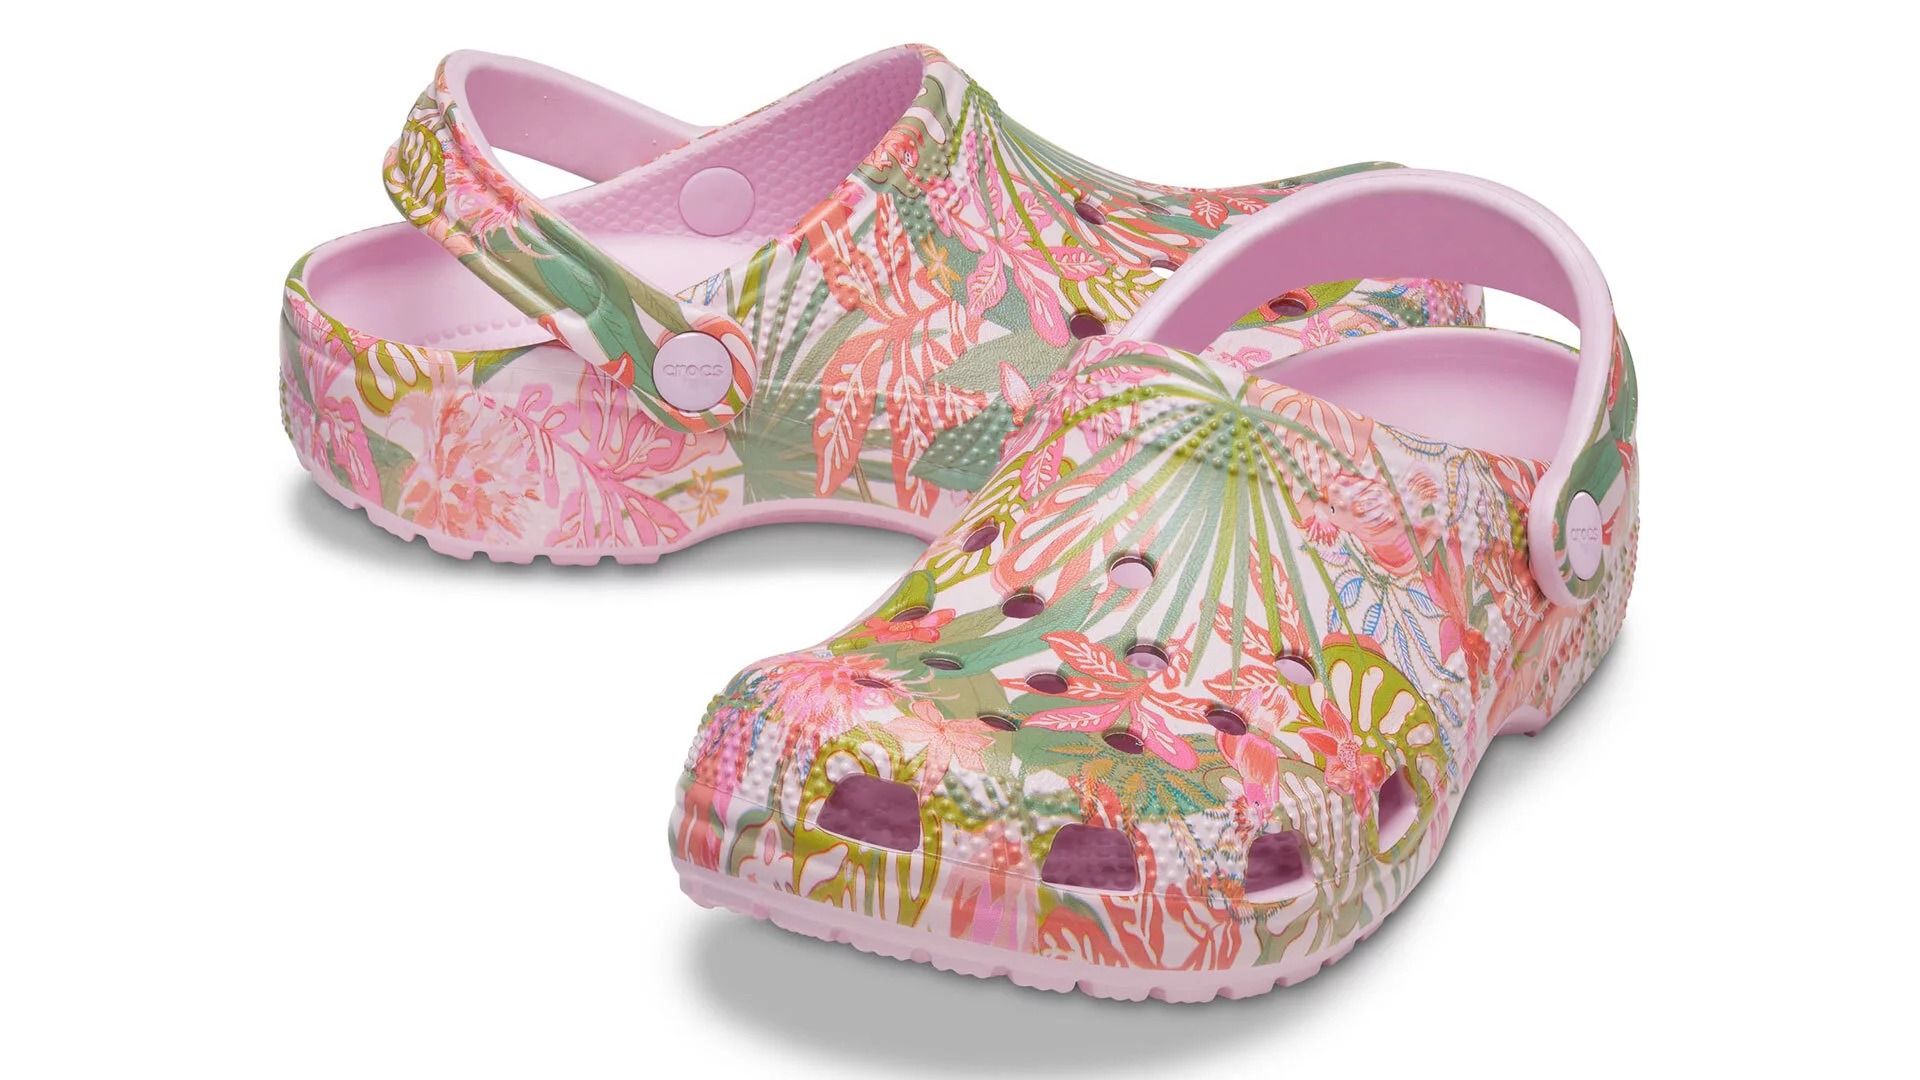 Crocs Classic Clog in Rain Forest Canopy Pink with Vera Bradley1